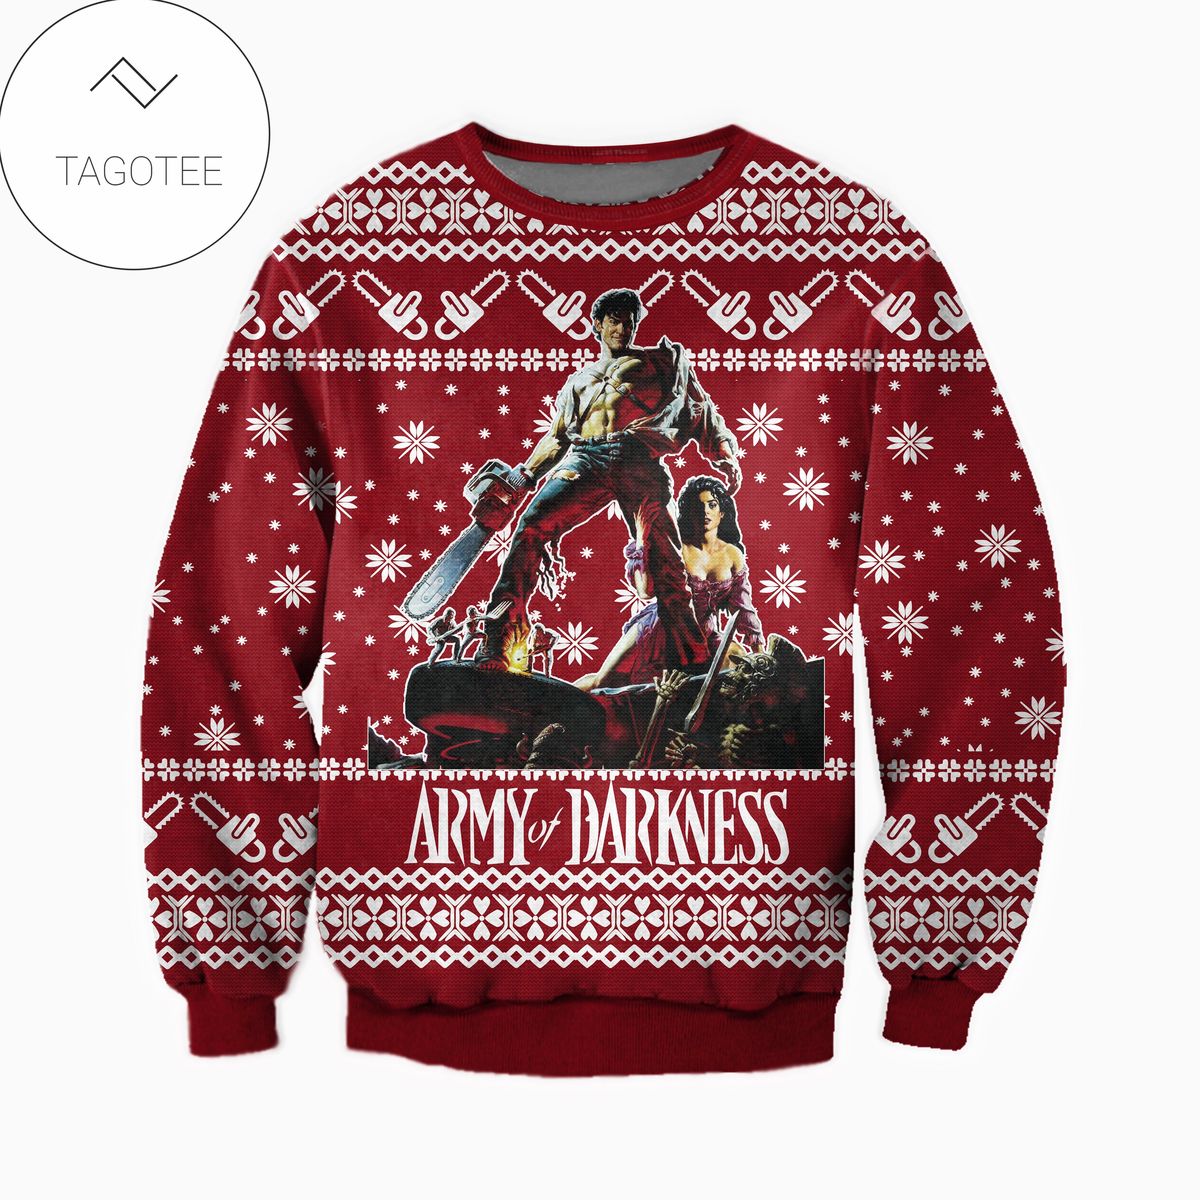 2021 Army Of Darkness Ugly Christmas Sweater